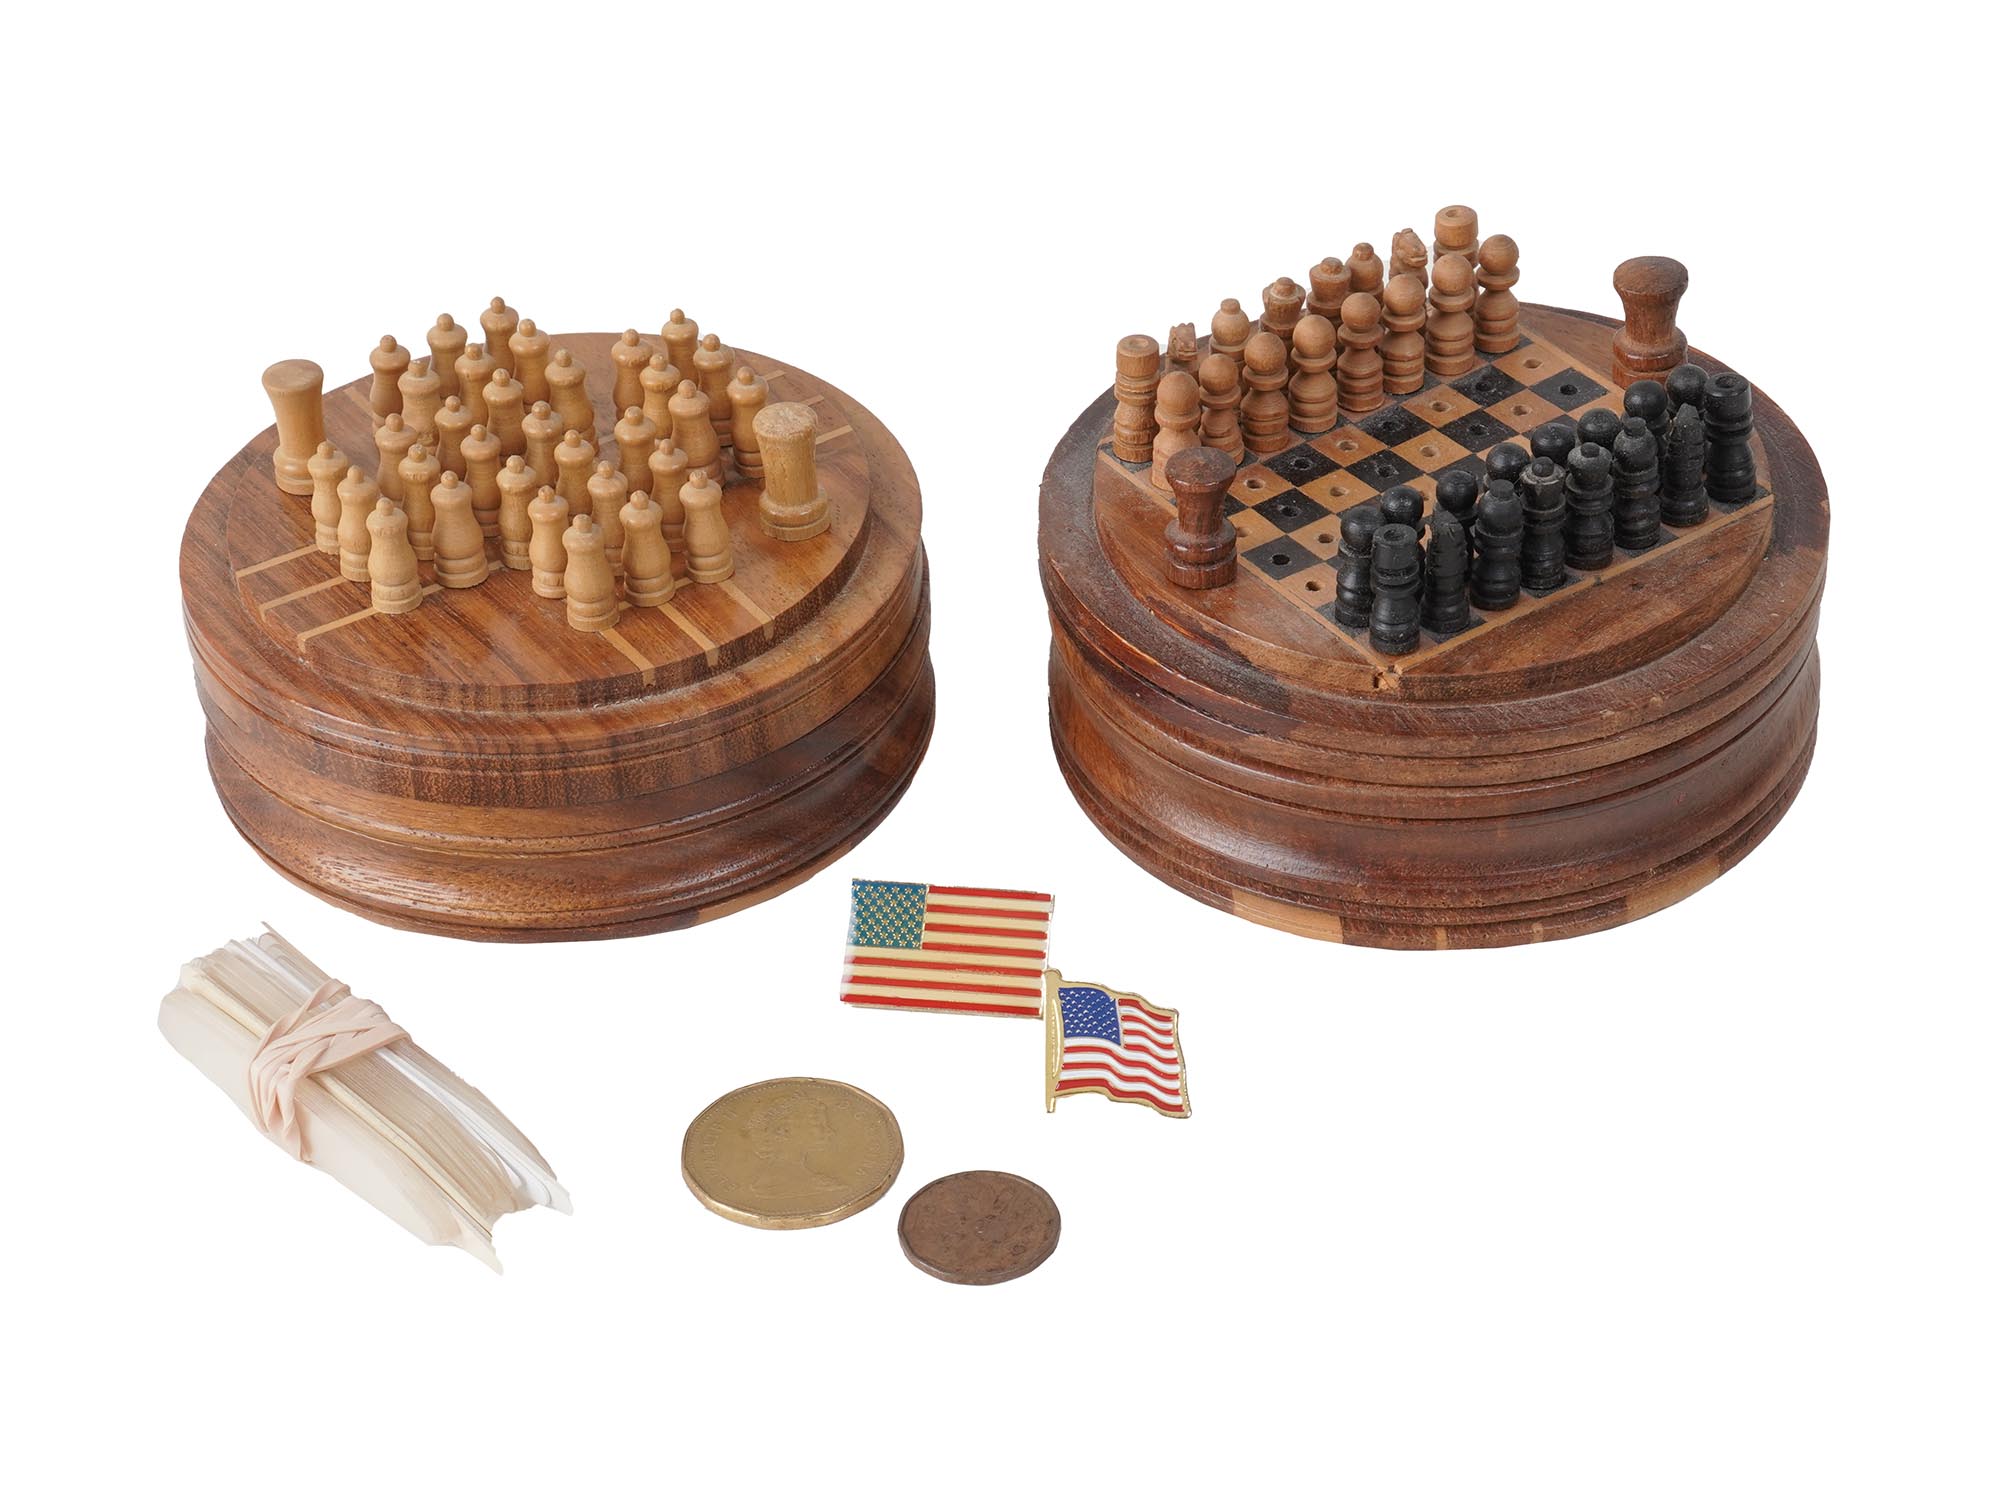 VINTAGE MINIATURE SOLITAIRE AND CHESS GAMES PIC-0